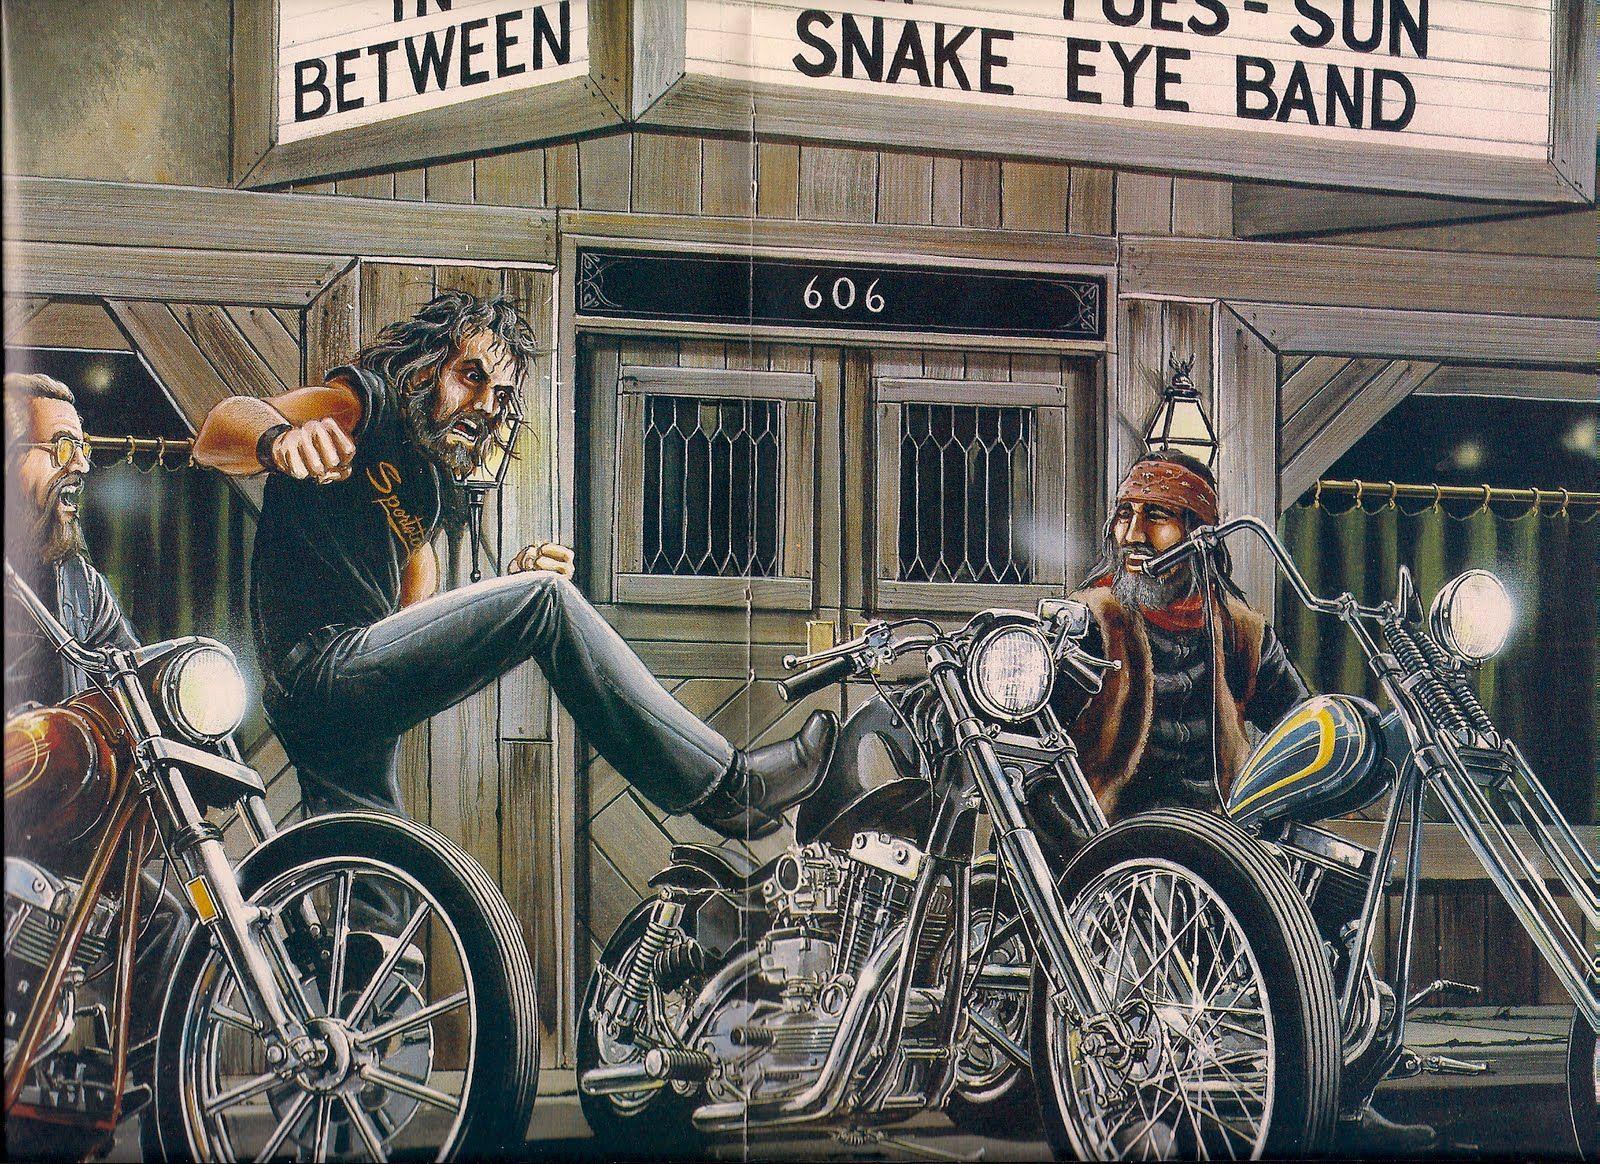 Dave Mann painted several posters for Big Daddy Roth, the California